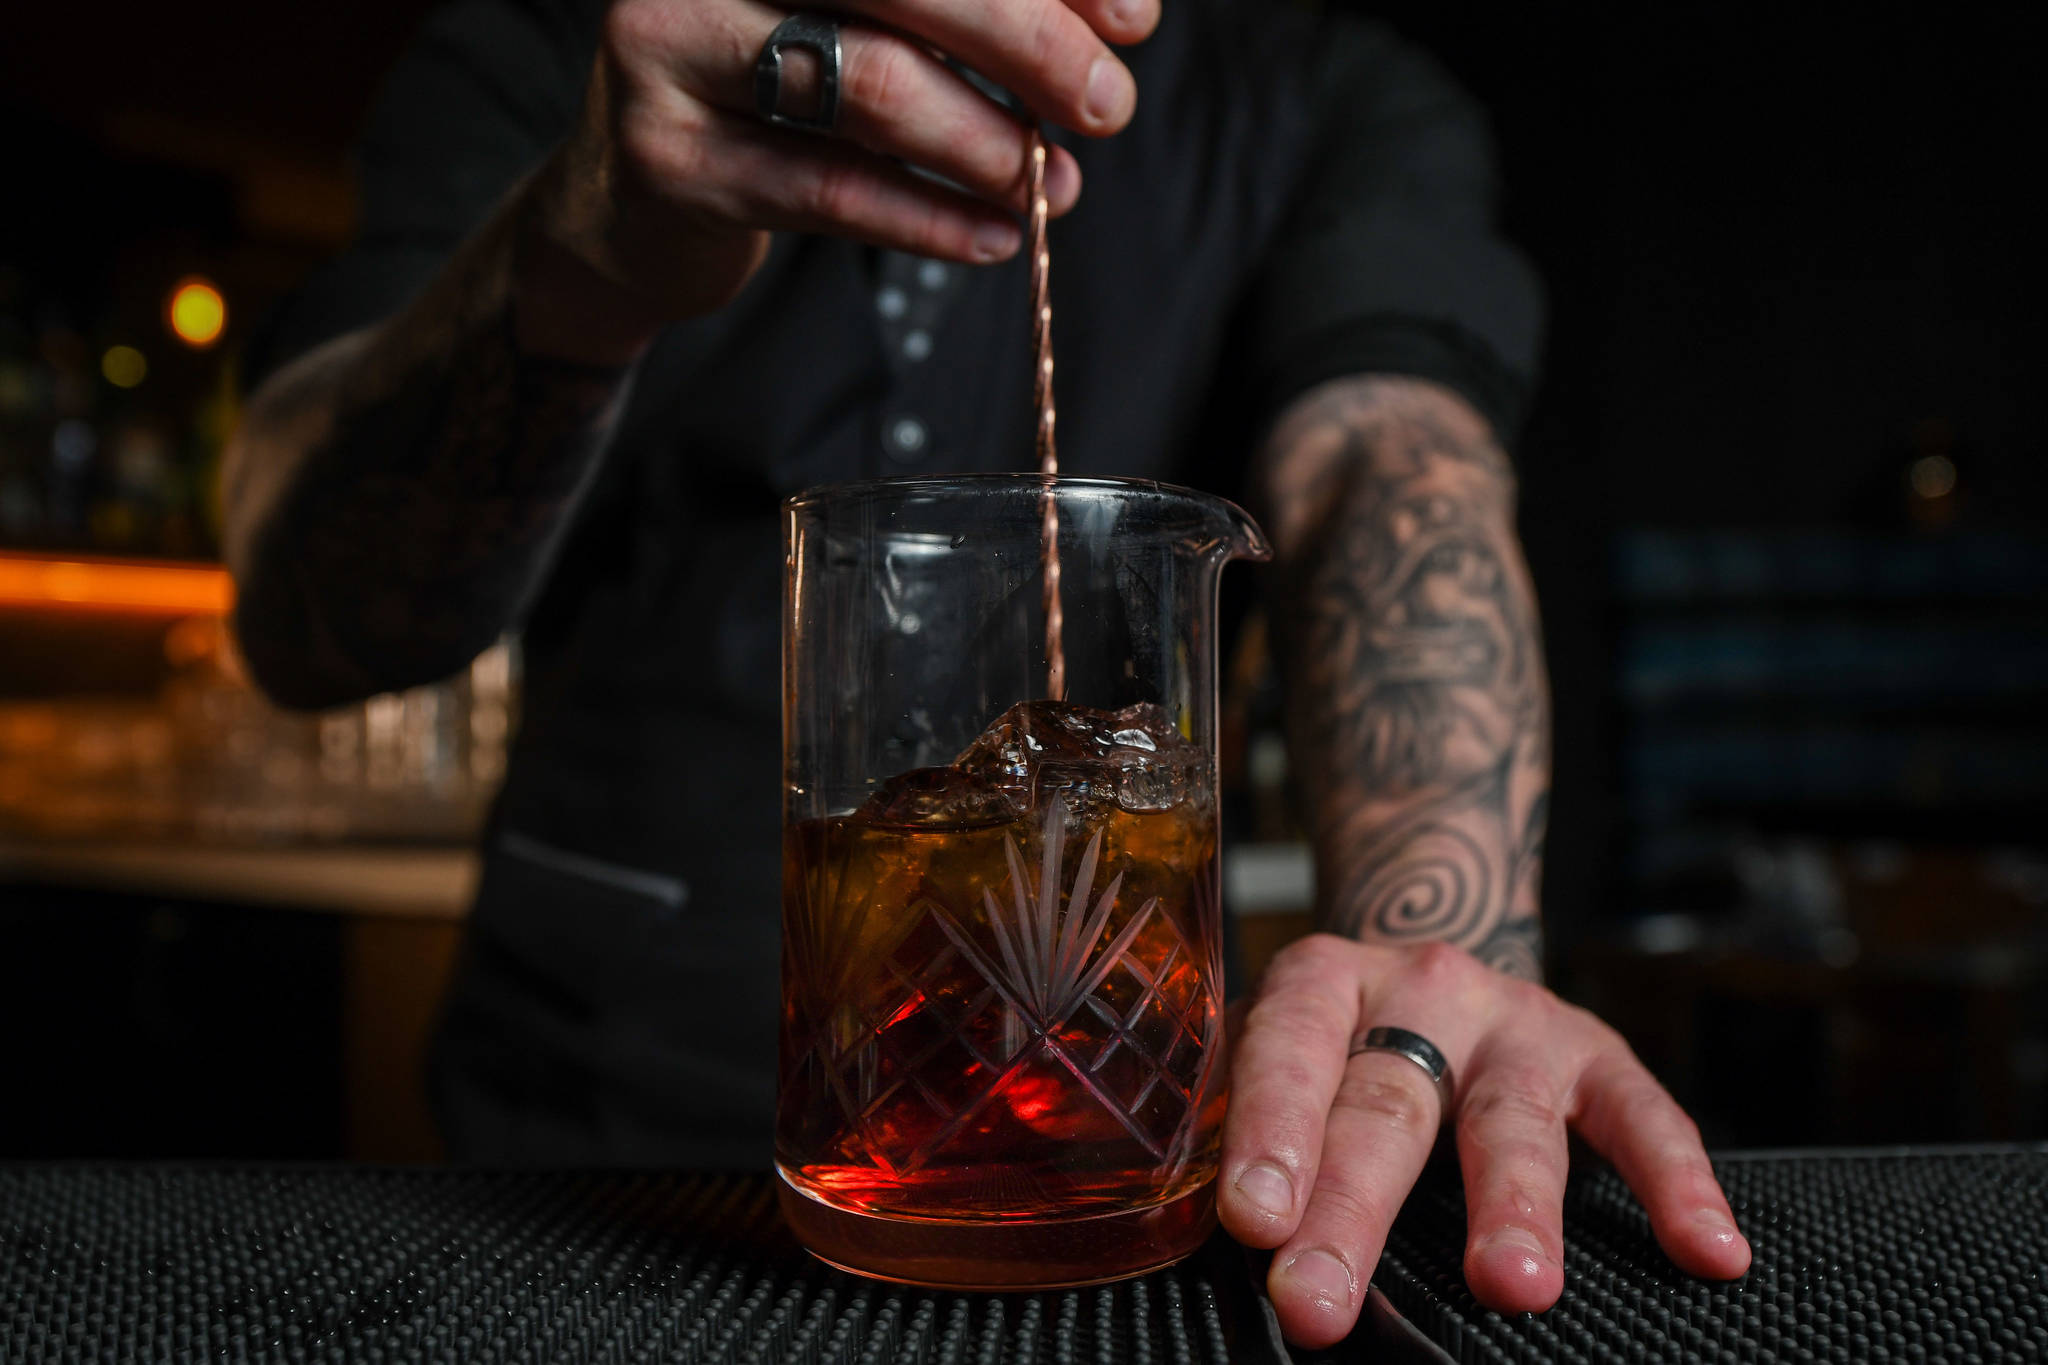 Joe Dietrich, bar manager at Civility & Unrest, stirs a cocktail. Courtesy photo